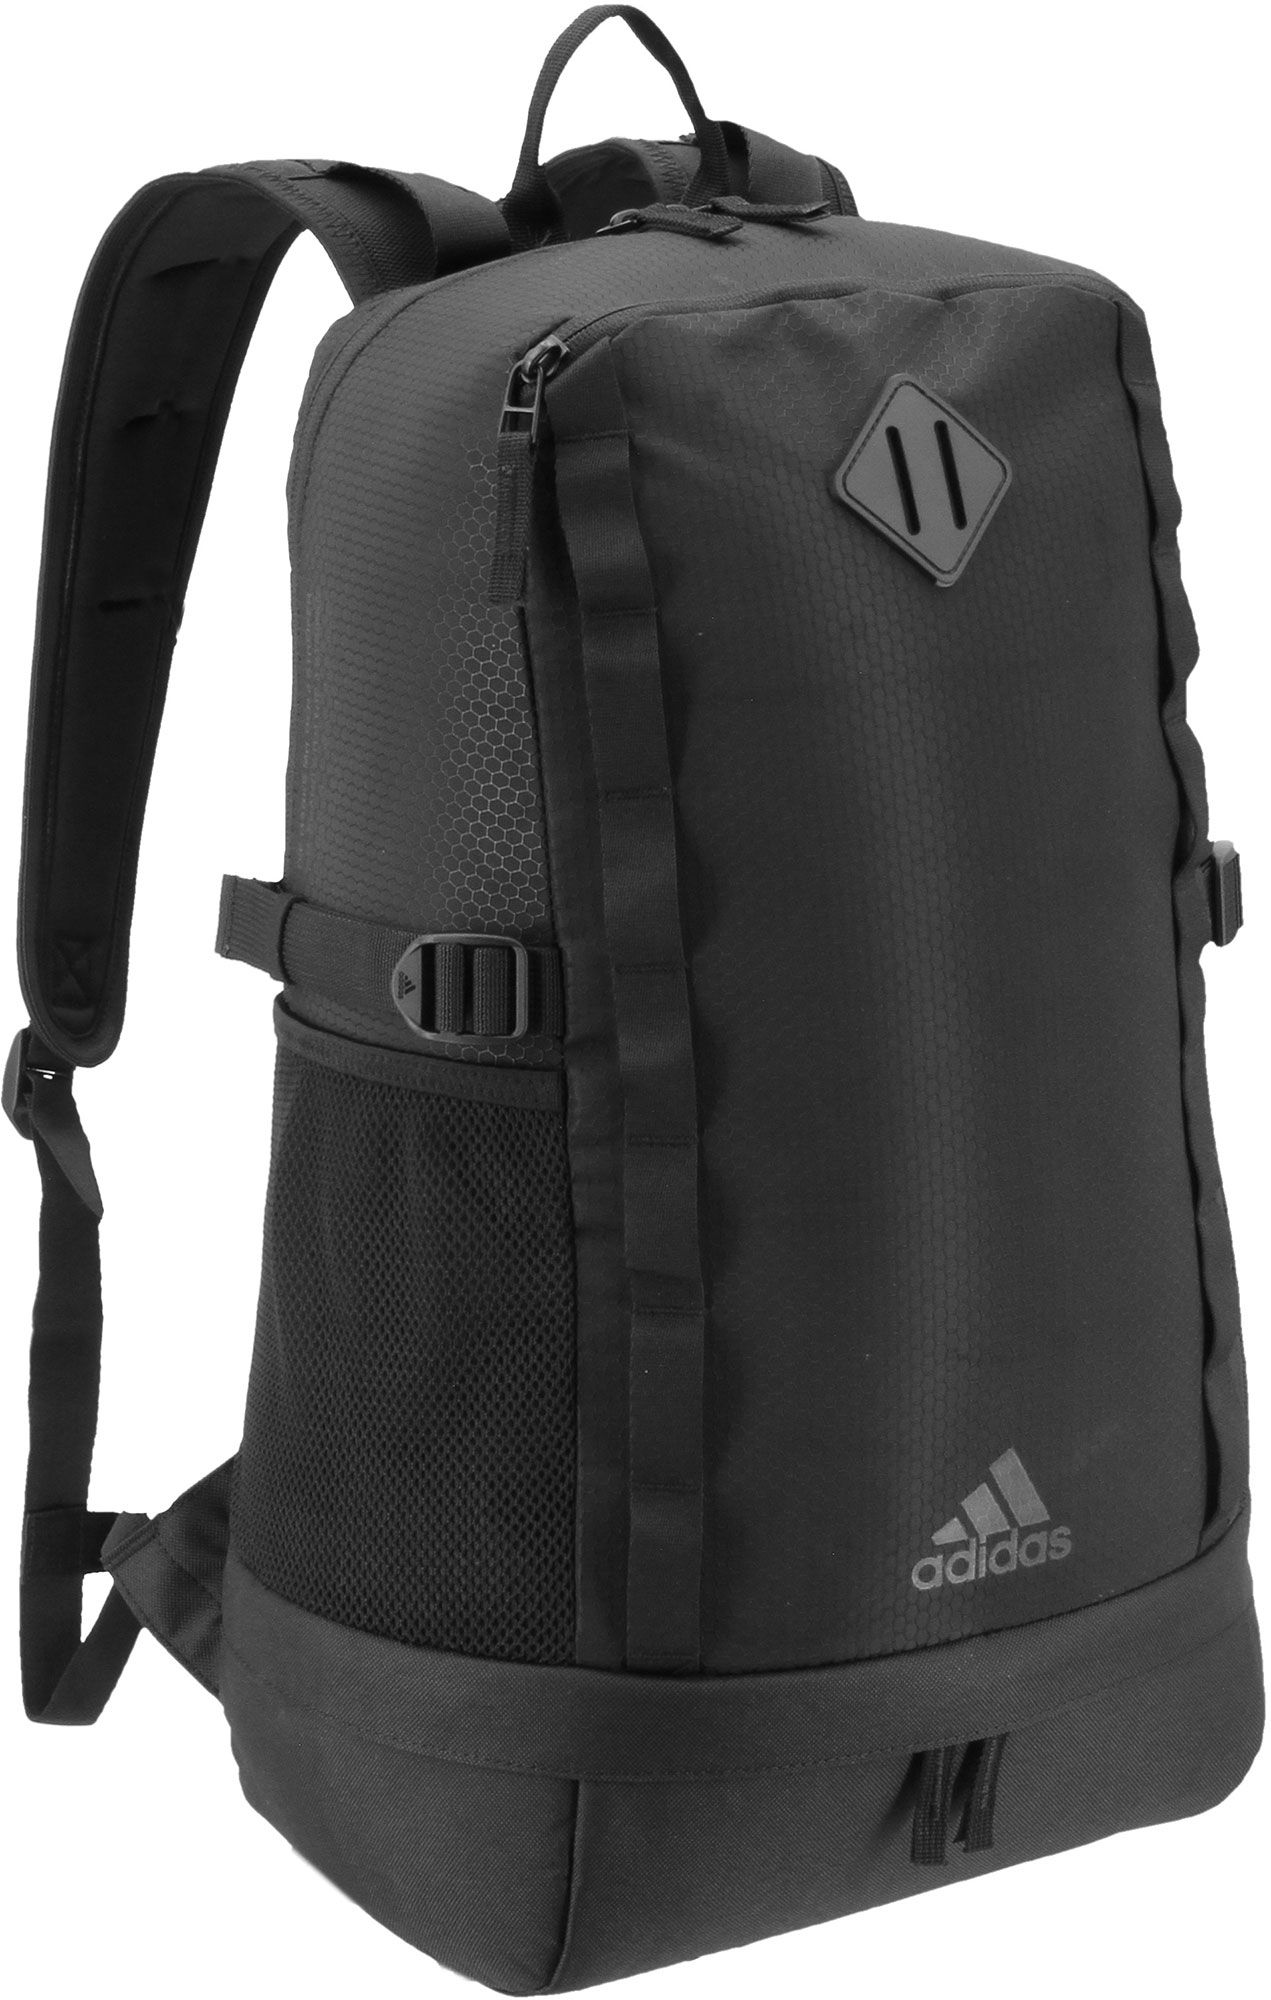 adidas Franchise Backpack | Best Price 